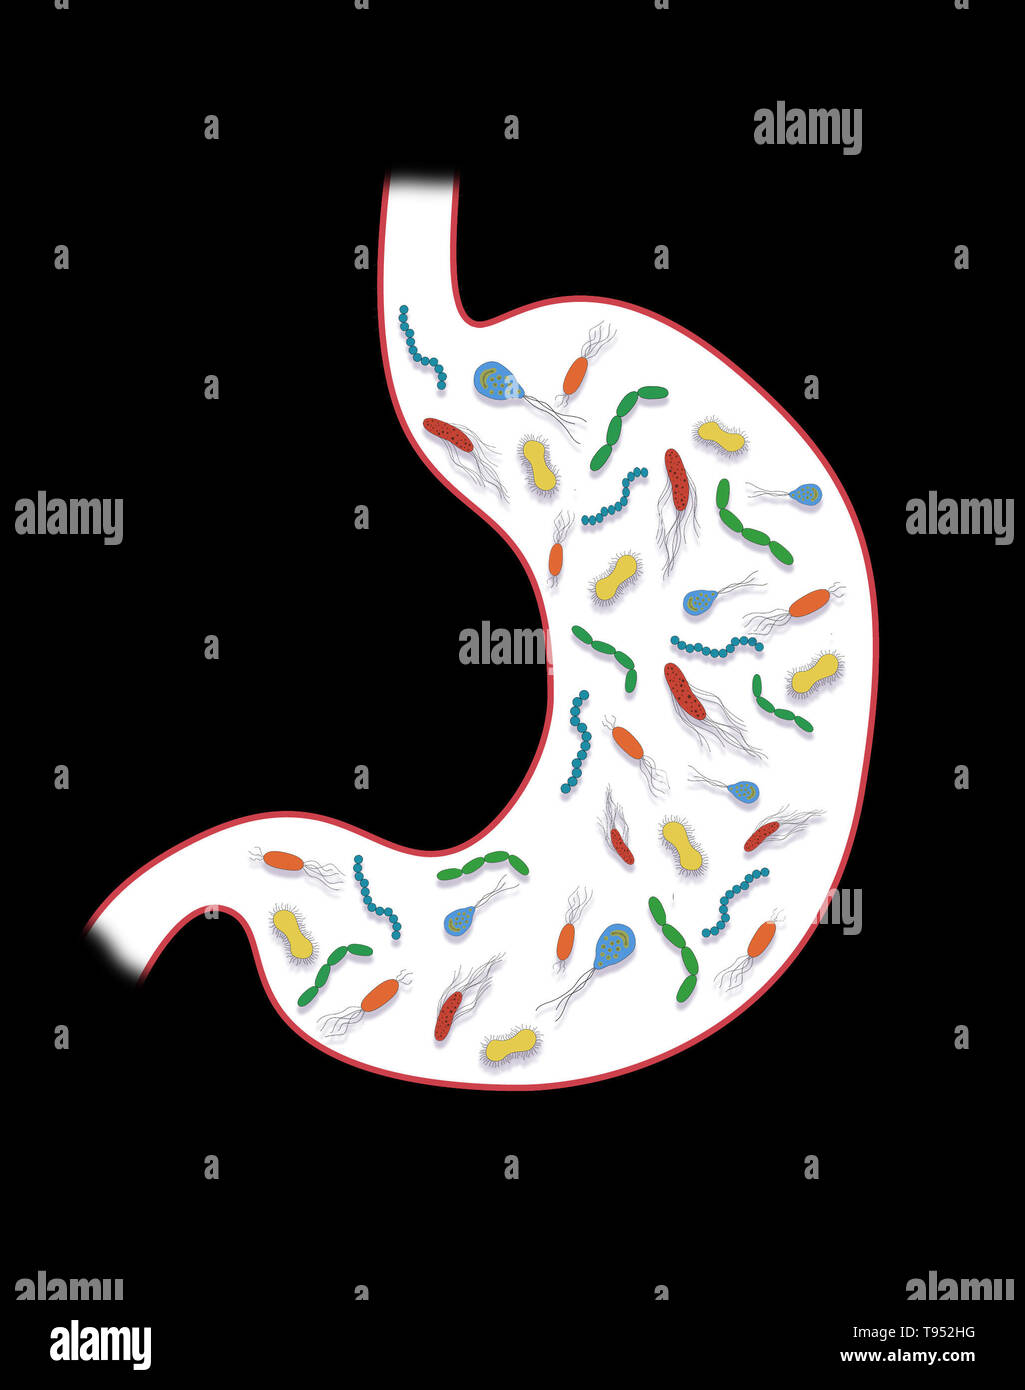 Illustration depicting gut bacteria in the stomach. Stock Photo